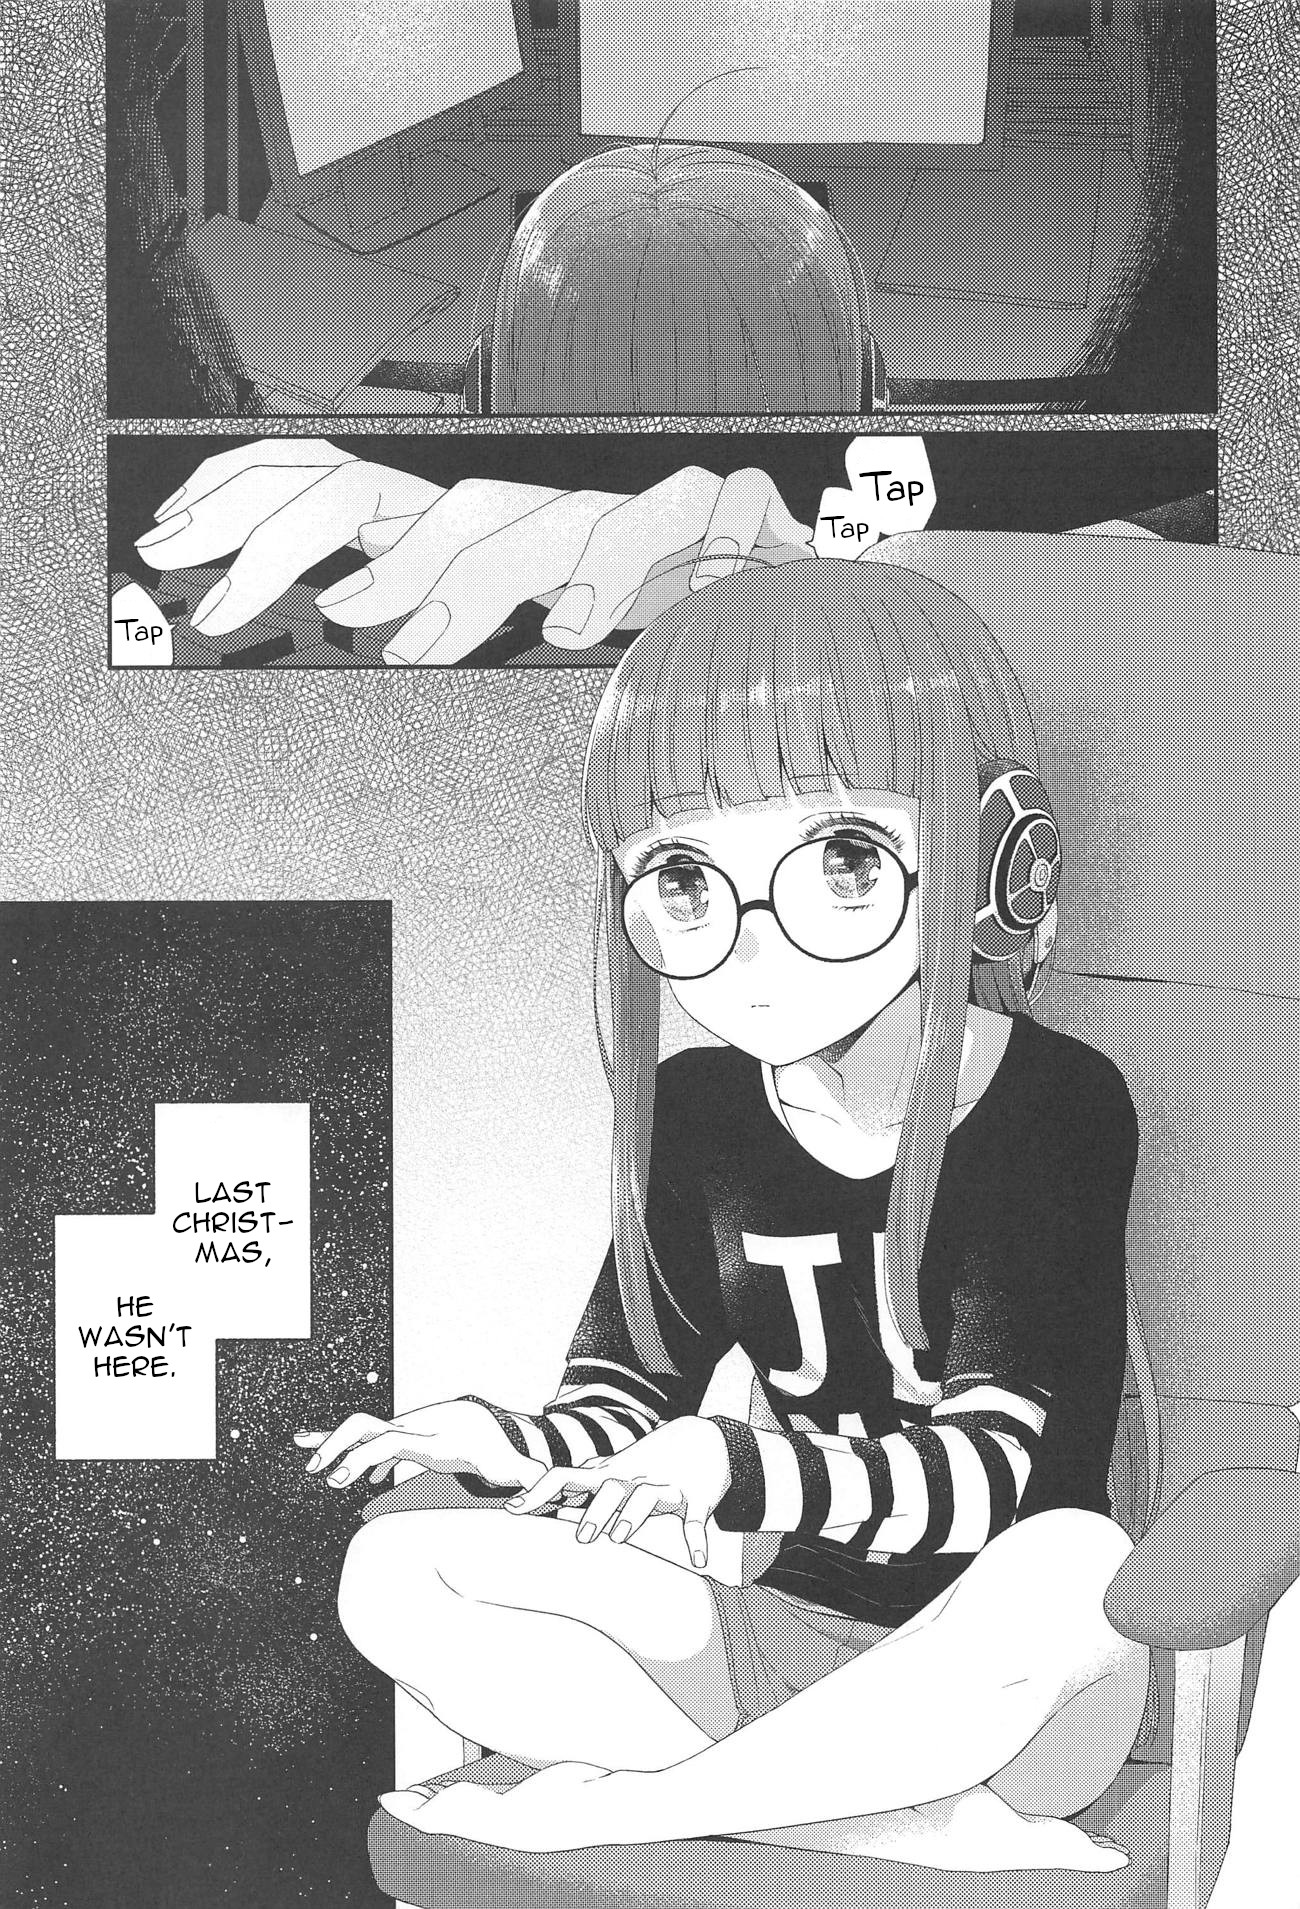 Porky recomended yuki lets futaba story with